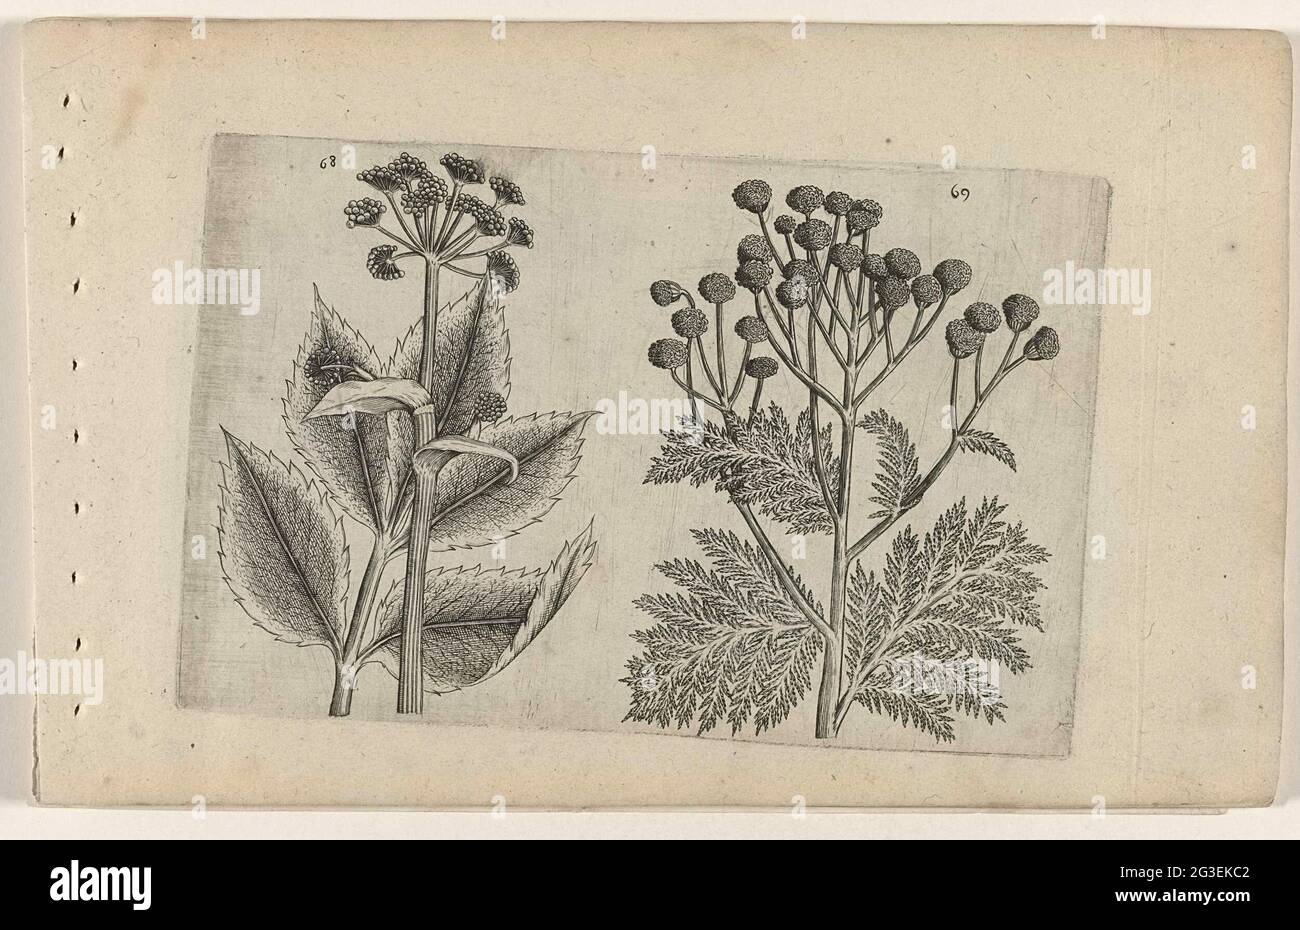 Hertswort and farmer's maze; Cognoscite Lilia. Hertswort (Seseli Lebanotis) and farmer's maze (Tanacetum Vulgare), numbered 68 and 69. Stock Photo